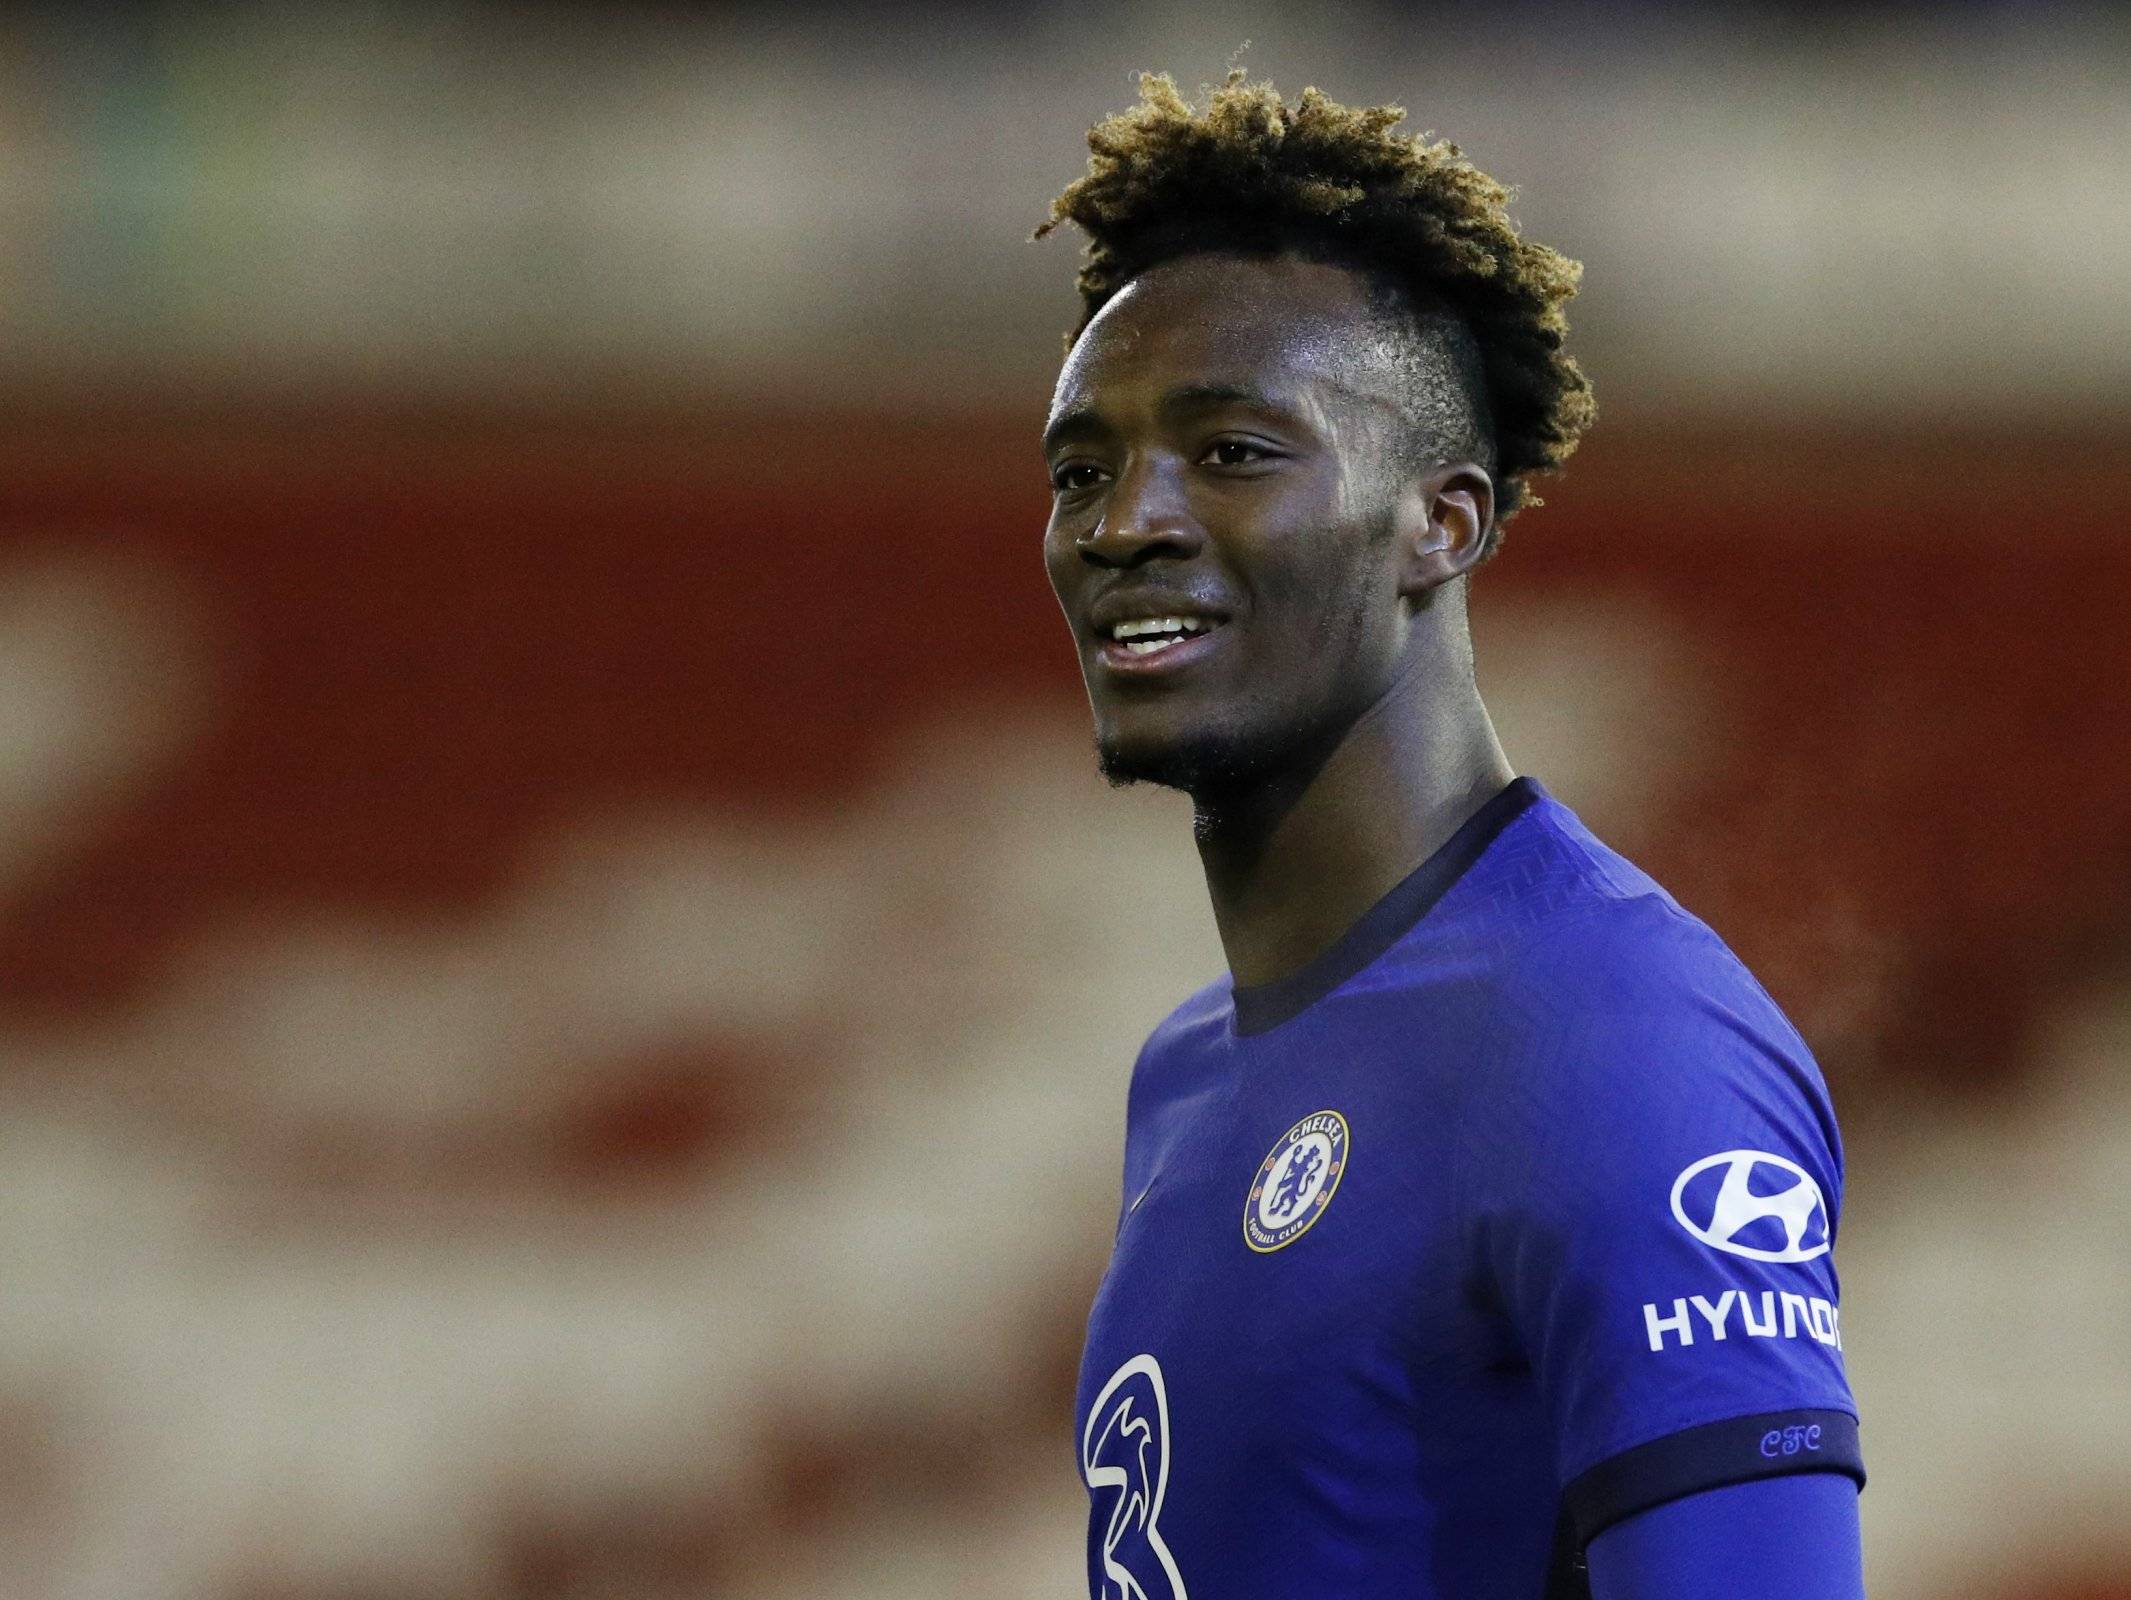 Chelsea have buy back clause for Tammy Abraham - Chelsea News